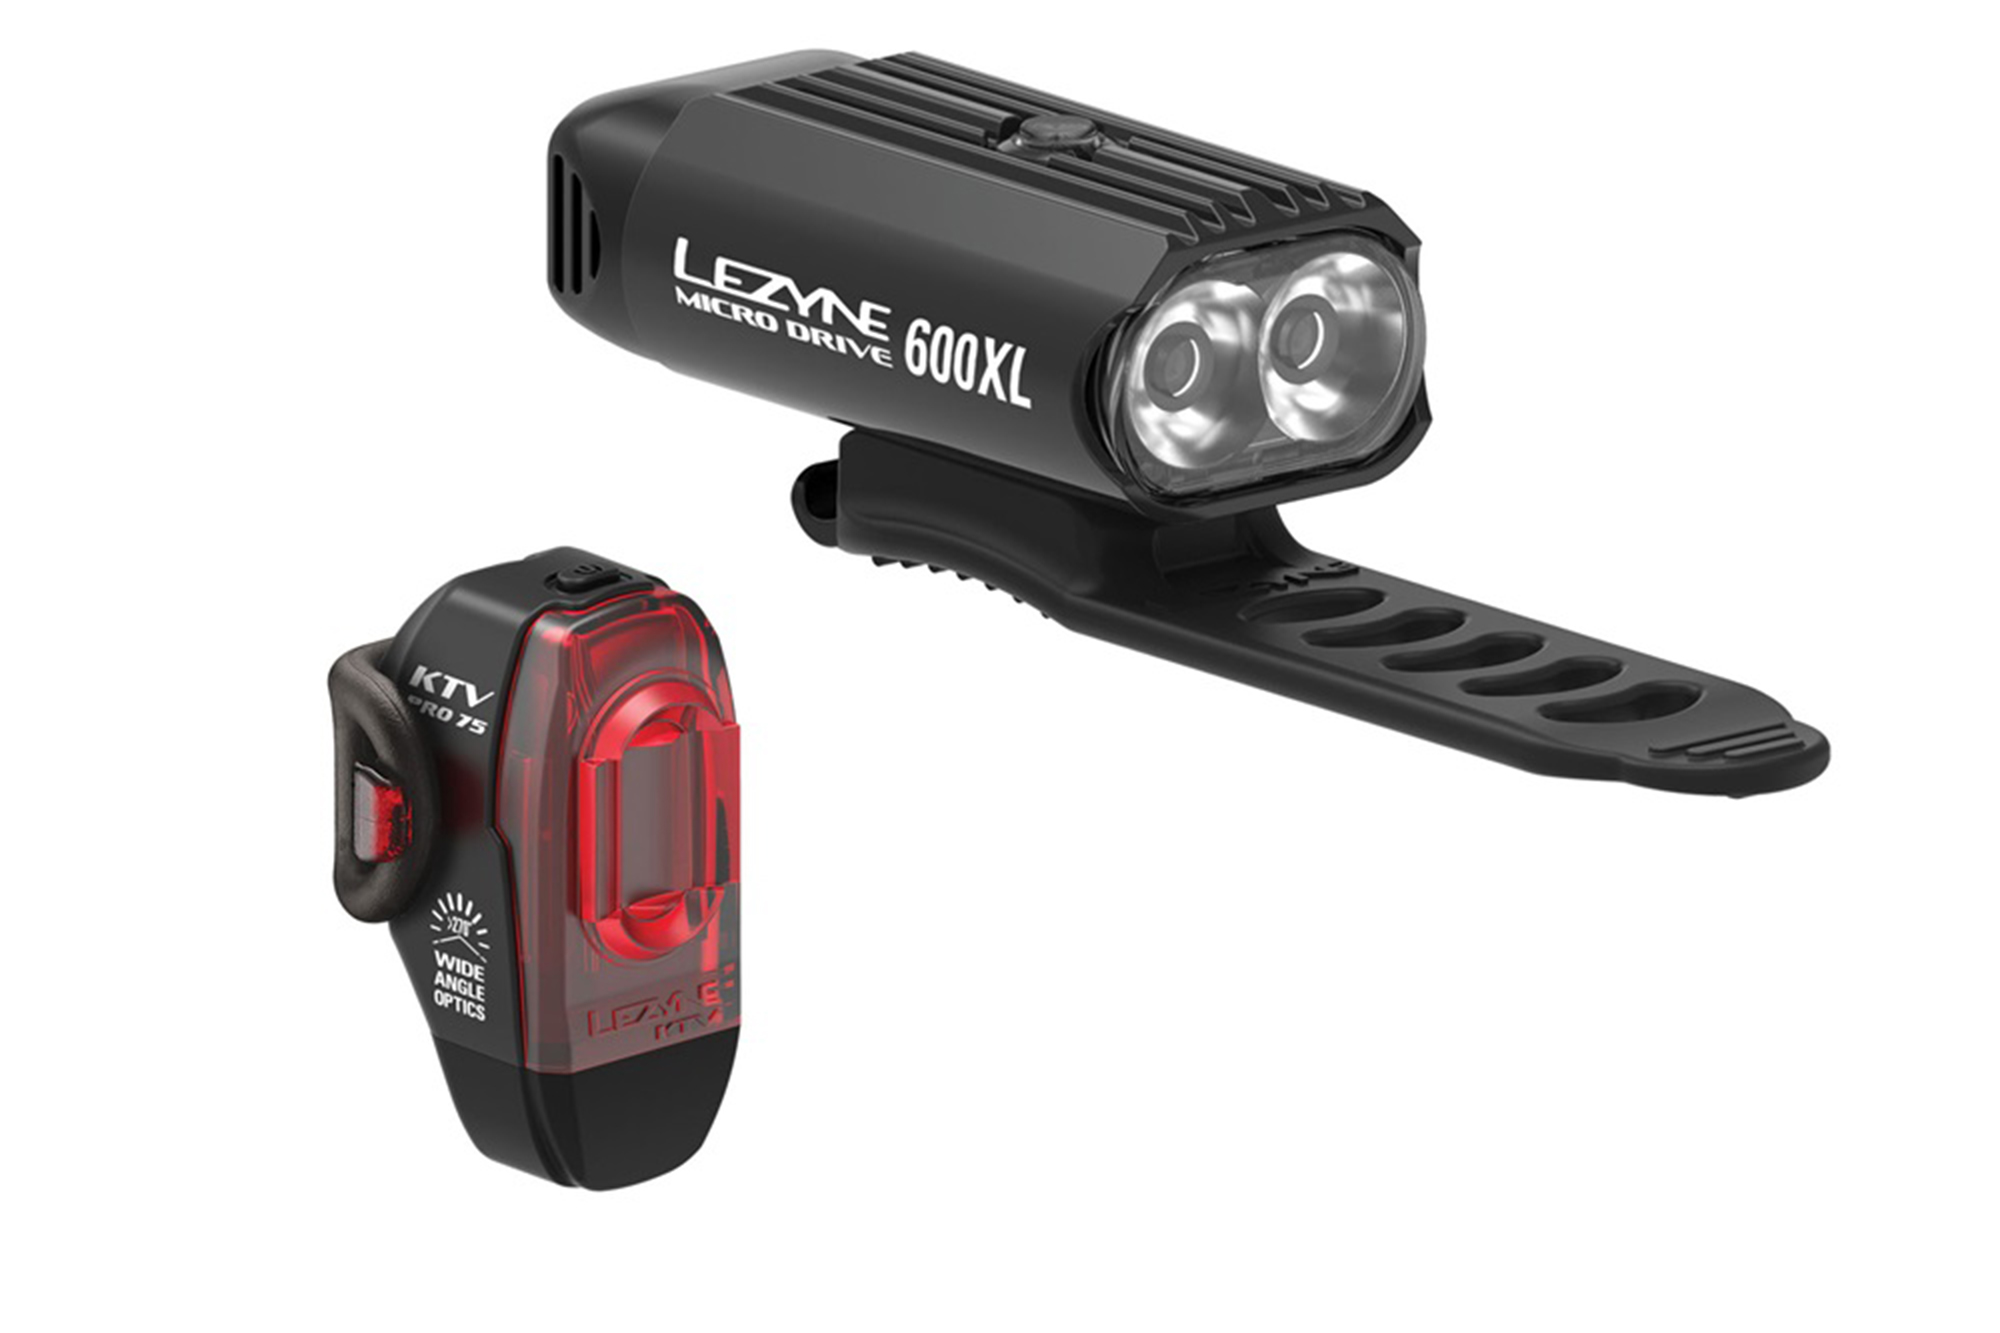 Lezyne Micro Drive 600XL and KTV Pro lightset review